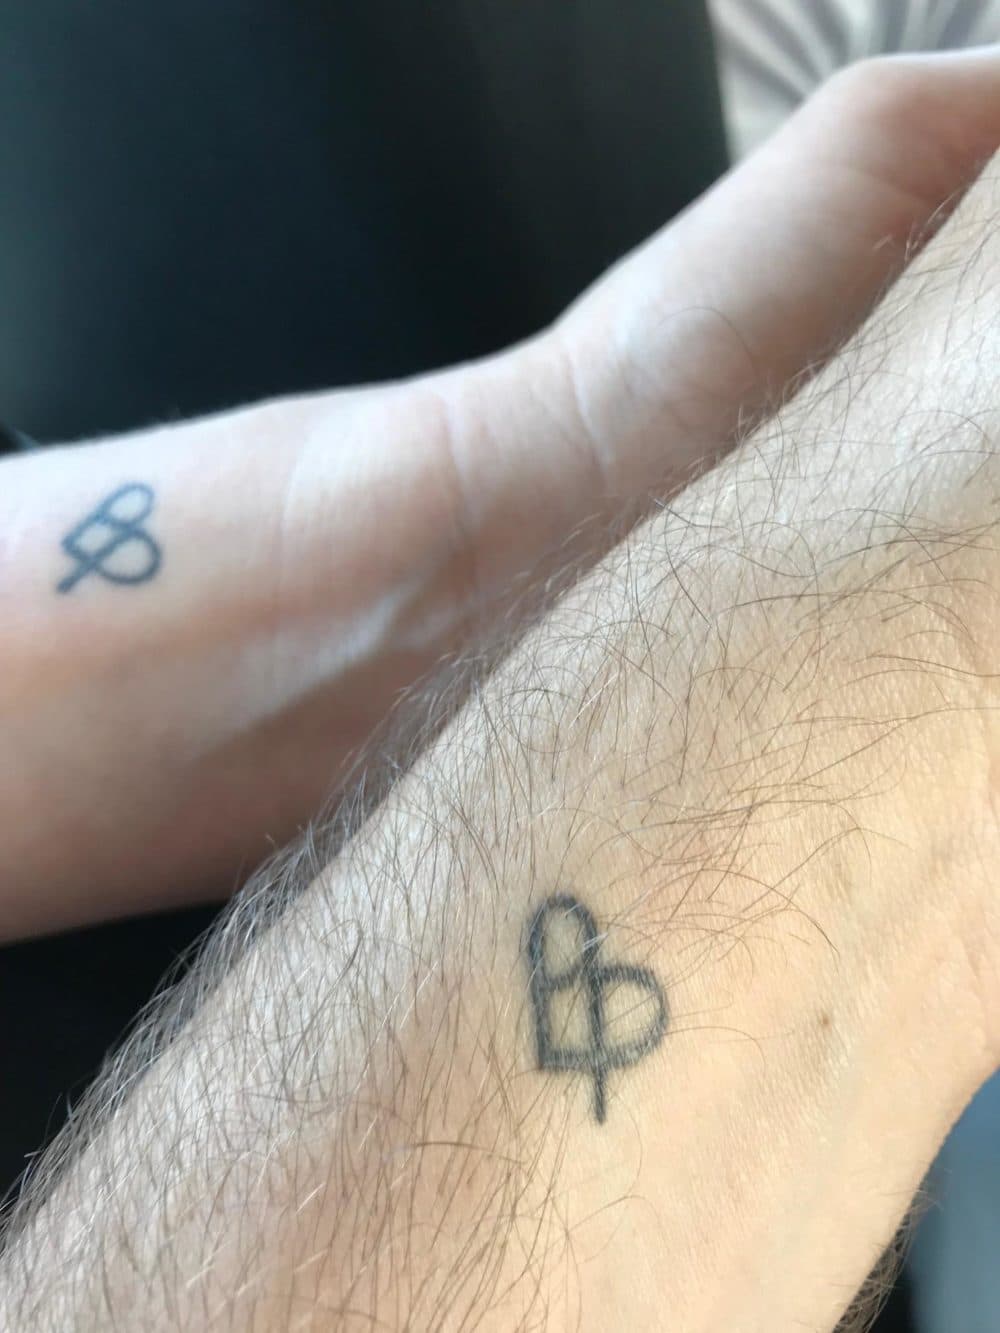 Marisa and Ephi's matching tattoos. (Courtesy Ephi Stempler)